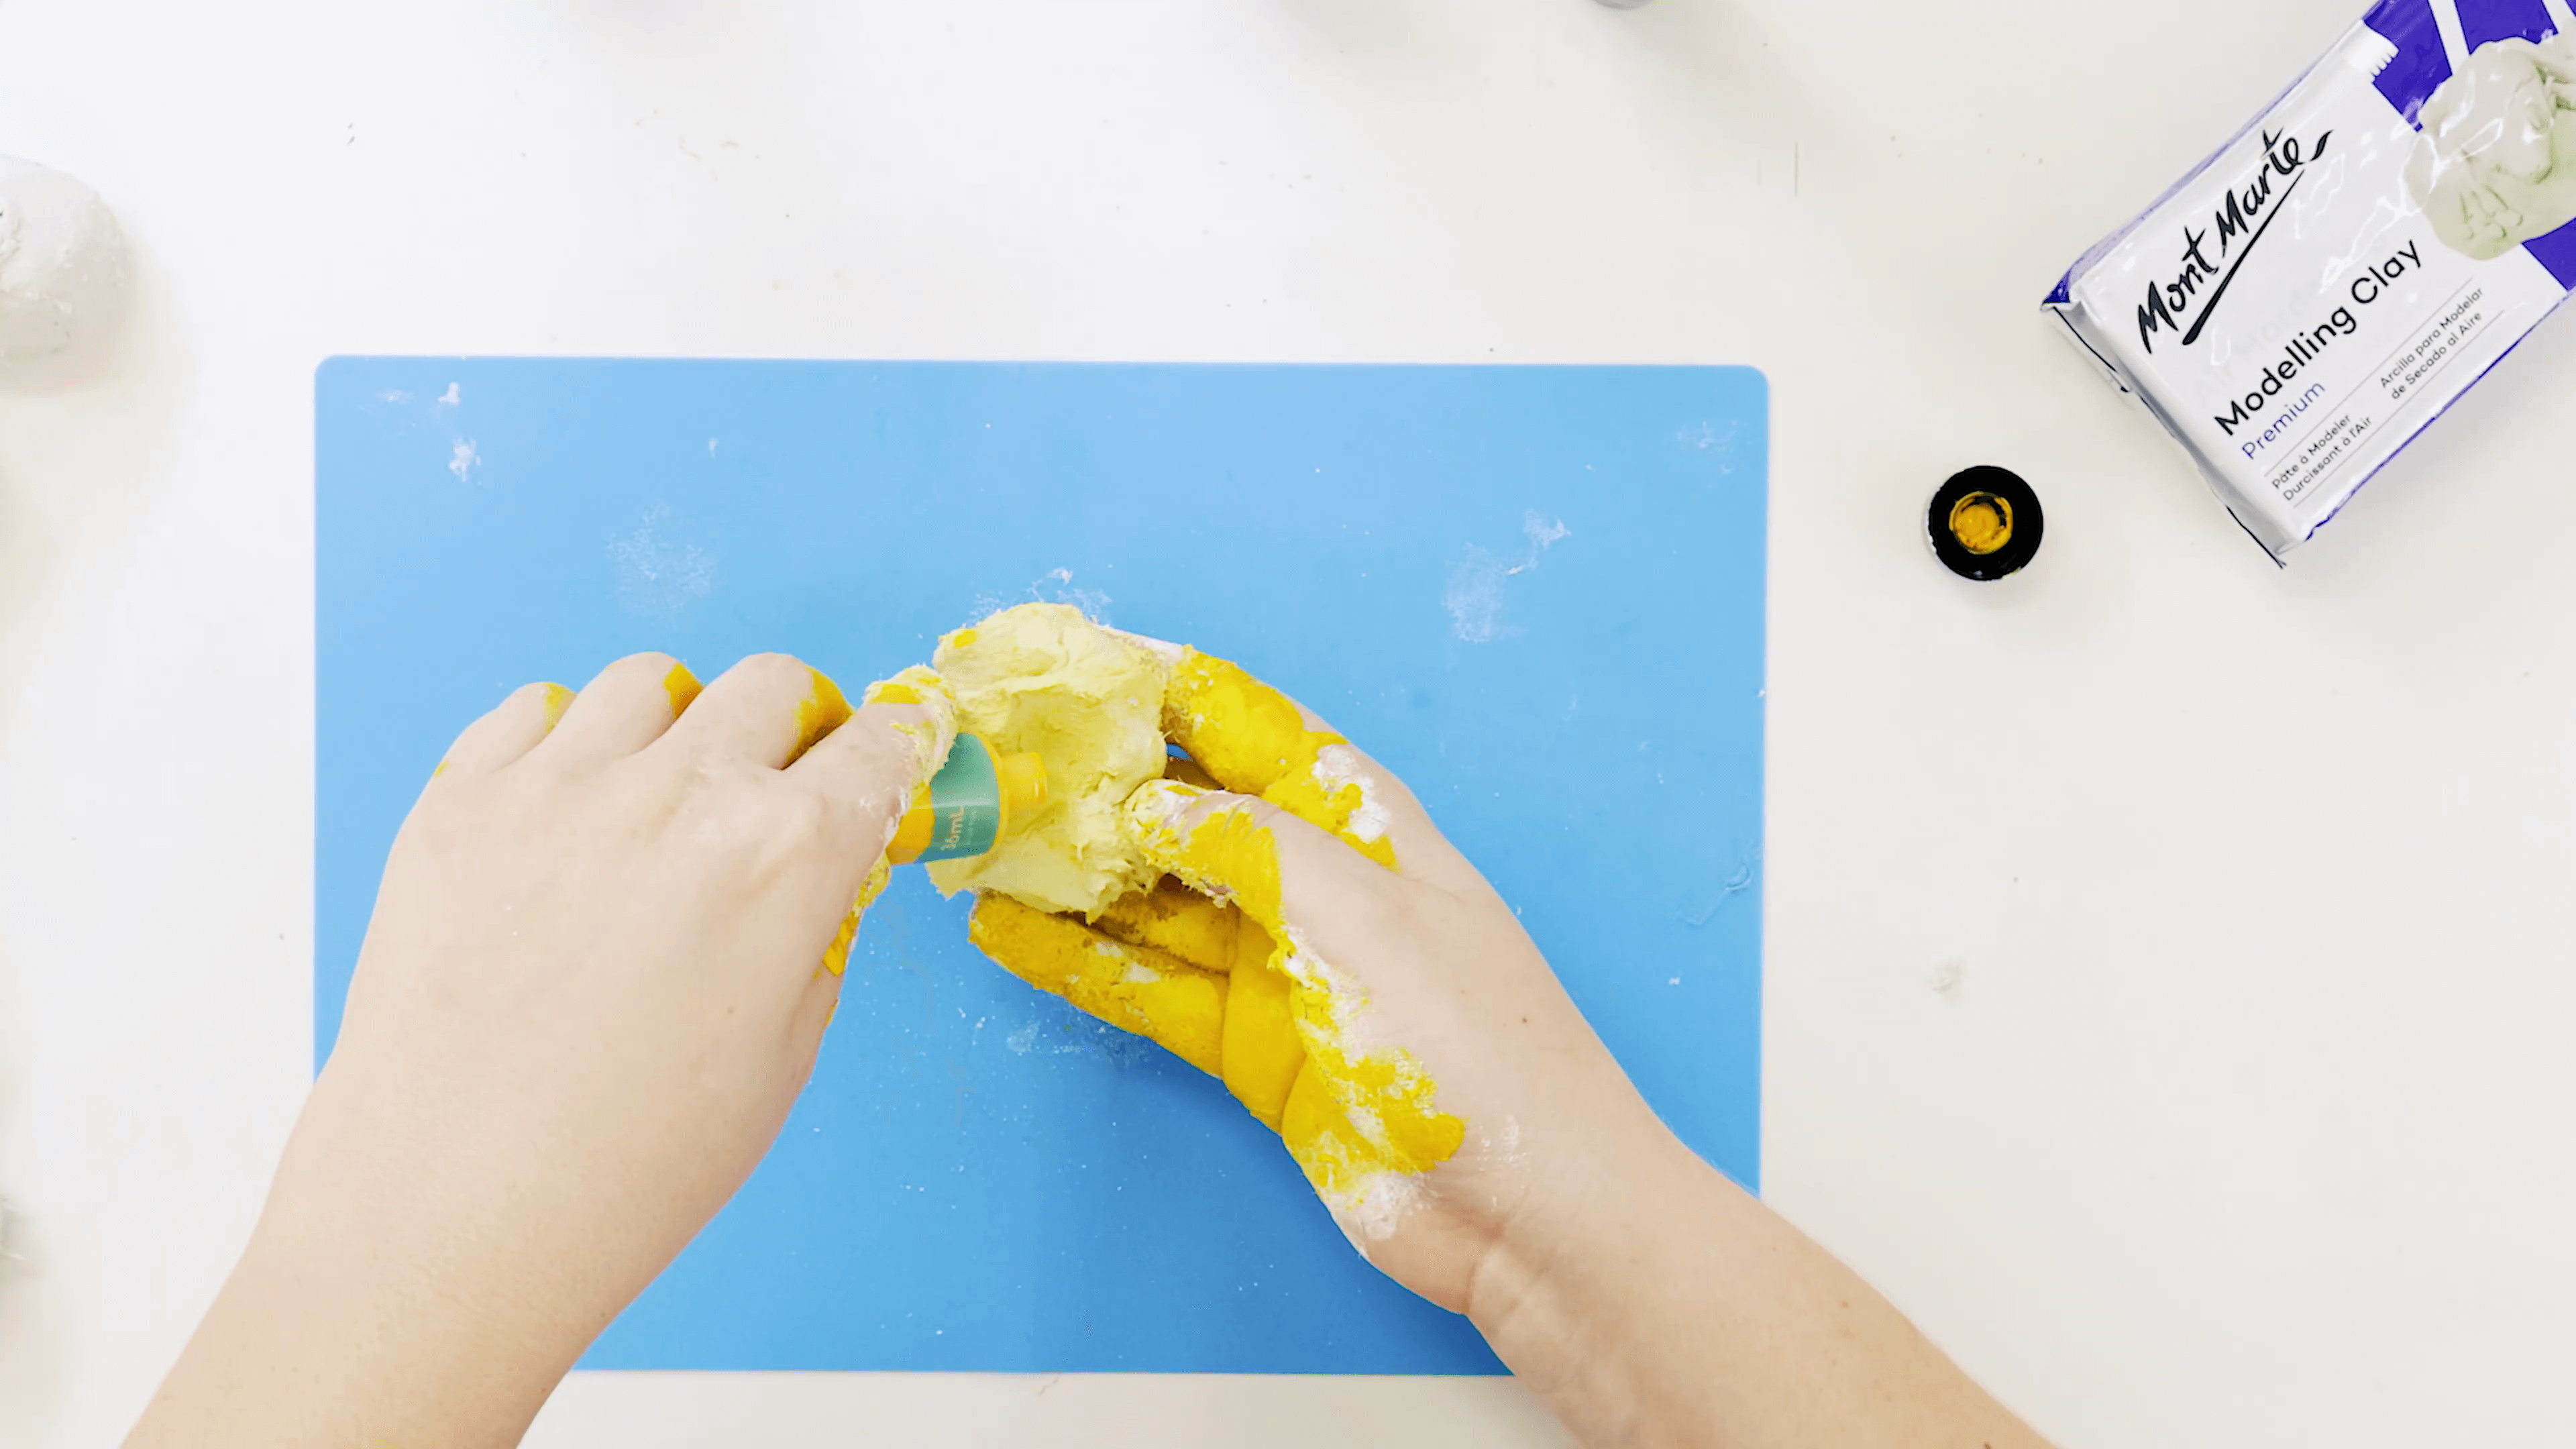 A hand squeezing yellow acrylic colour paint into the air dry clay ball.